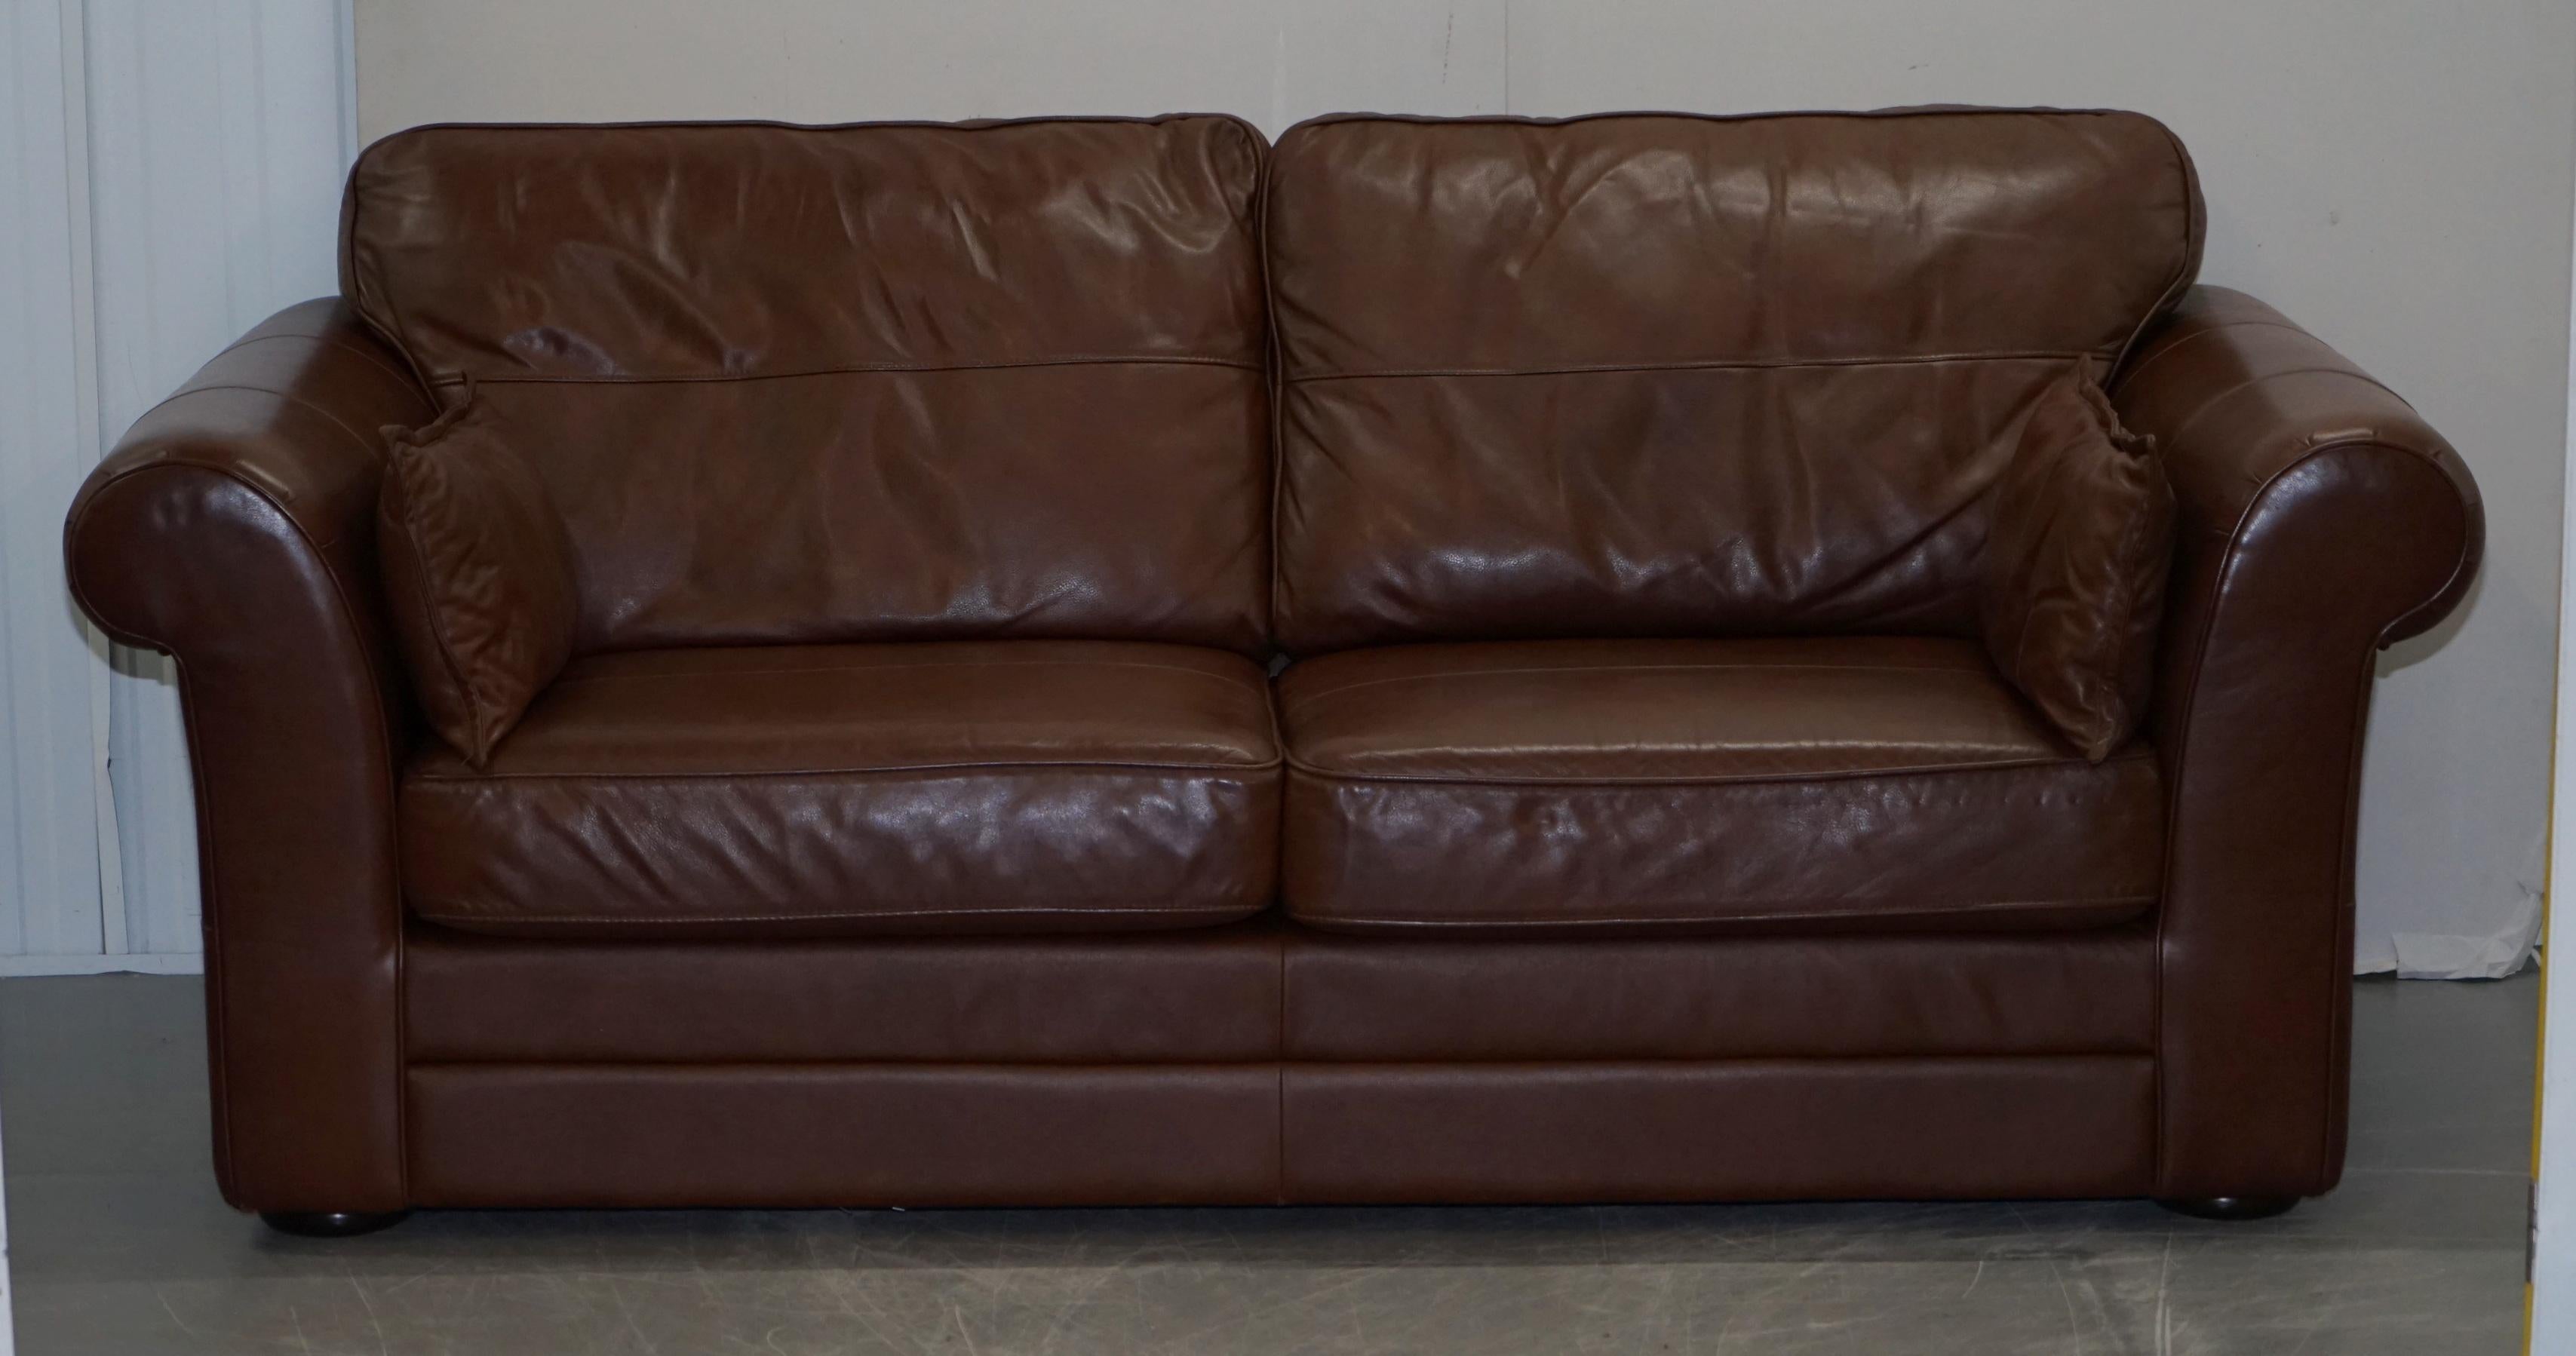 We are delighted to offer for sale this lovely contemporary brown leather oversized sofa which is part of a suite

This is part of a three piece suite, I have in total a large three seat sofa, a large two seat sofa and then an oversized armchair,